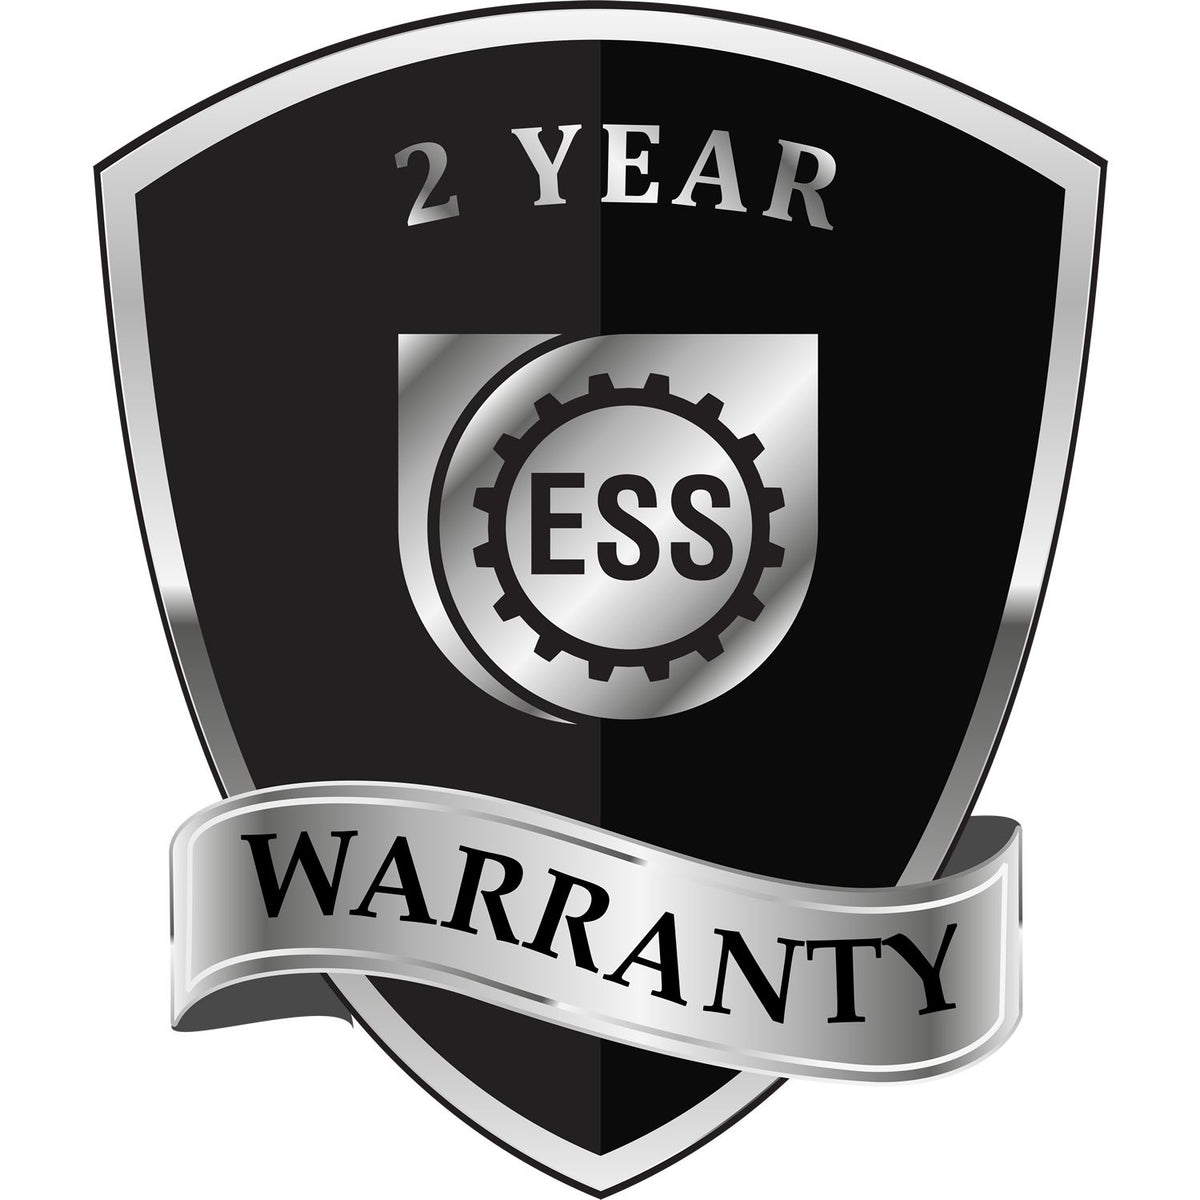 A black and silver badge or emblem showing warranty information for the Hybrid New Mexico Land Surveyor Seal